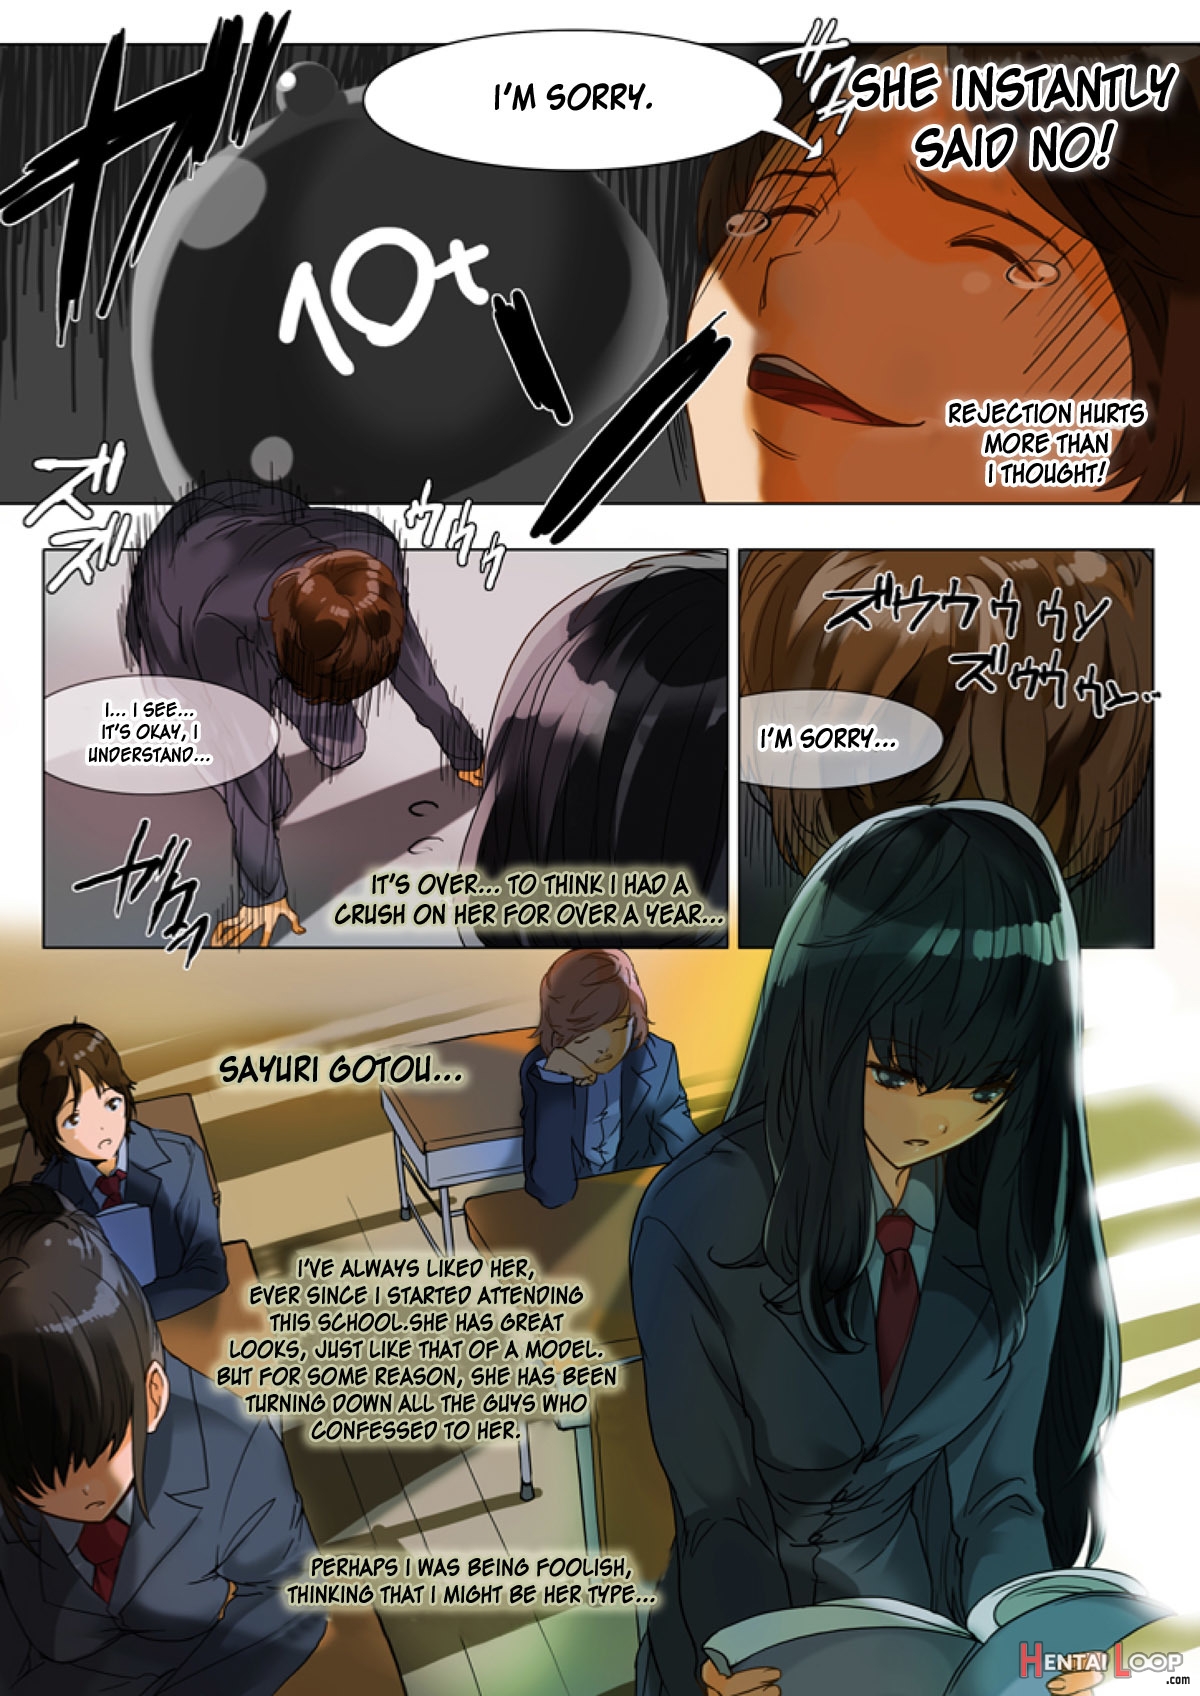 No Panty Girl Episode 1 page 3